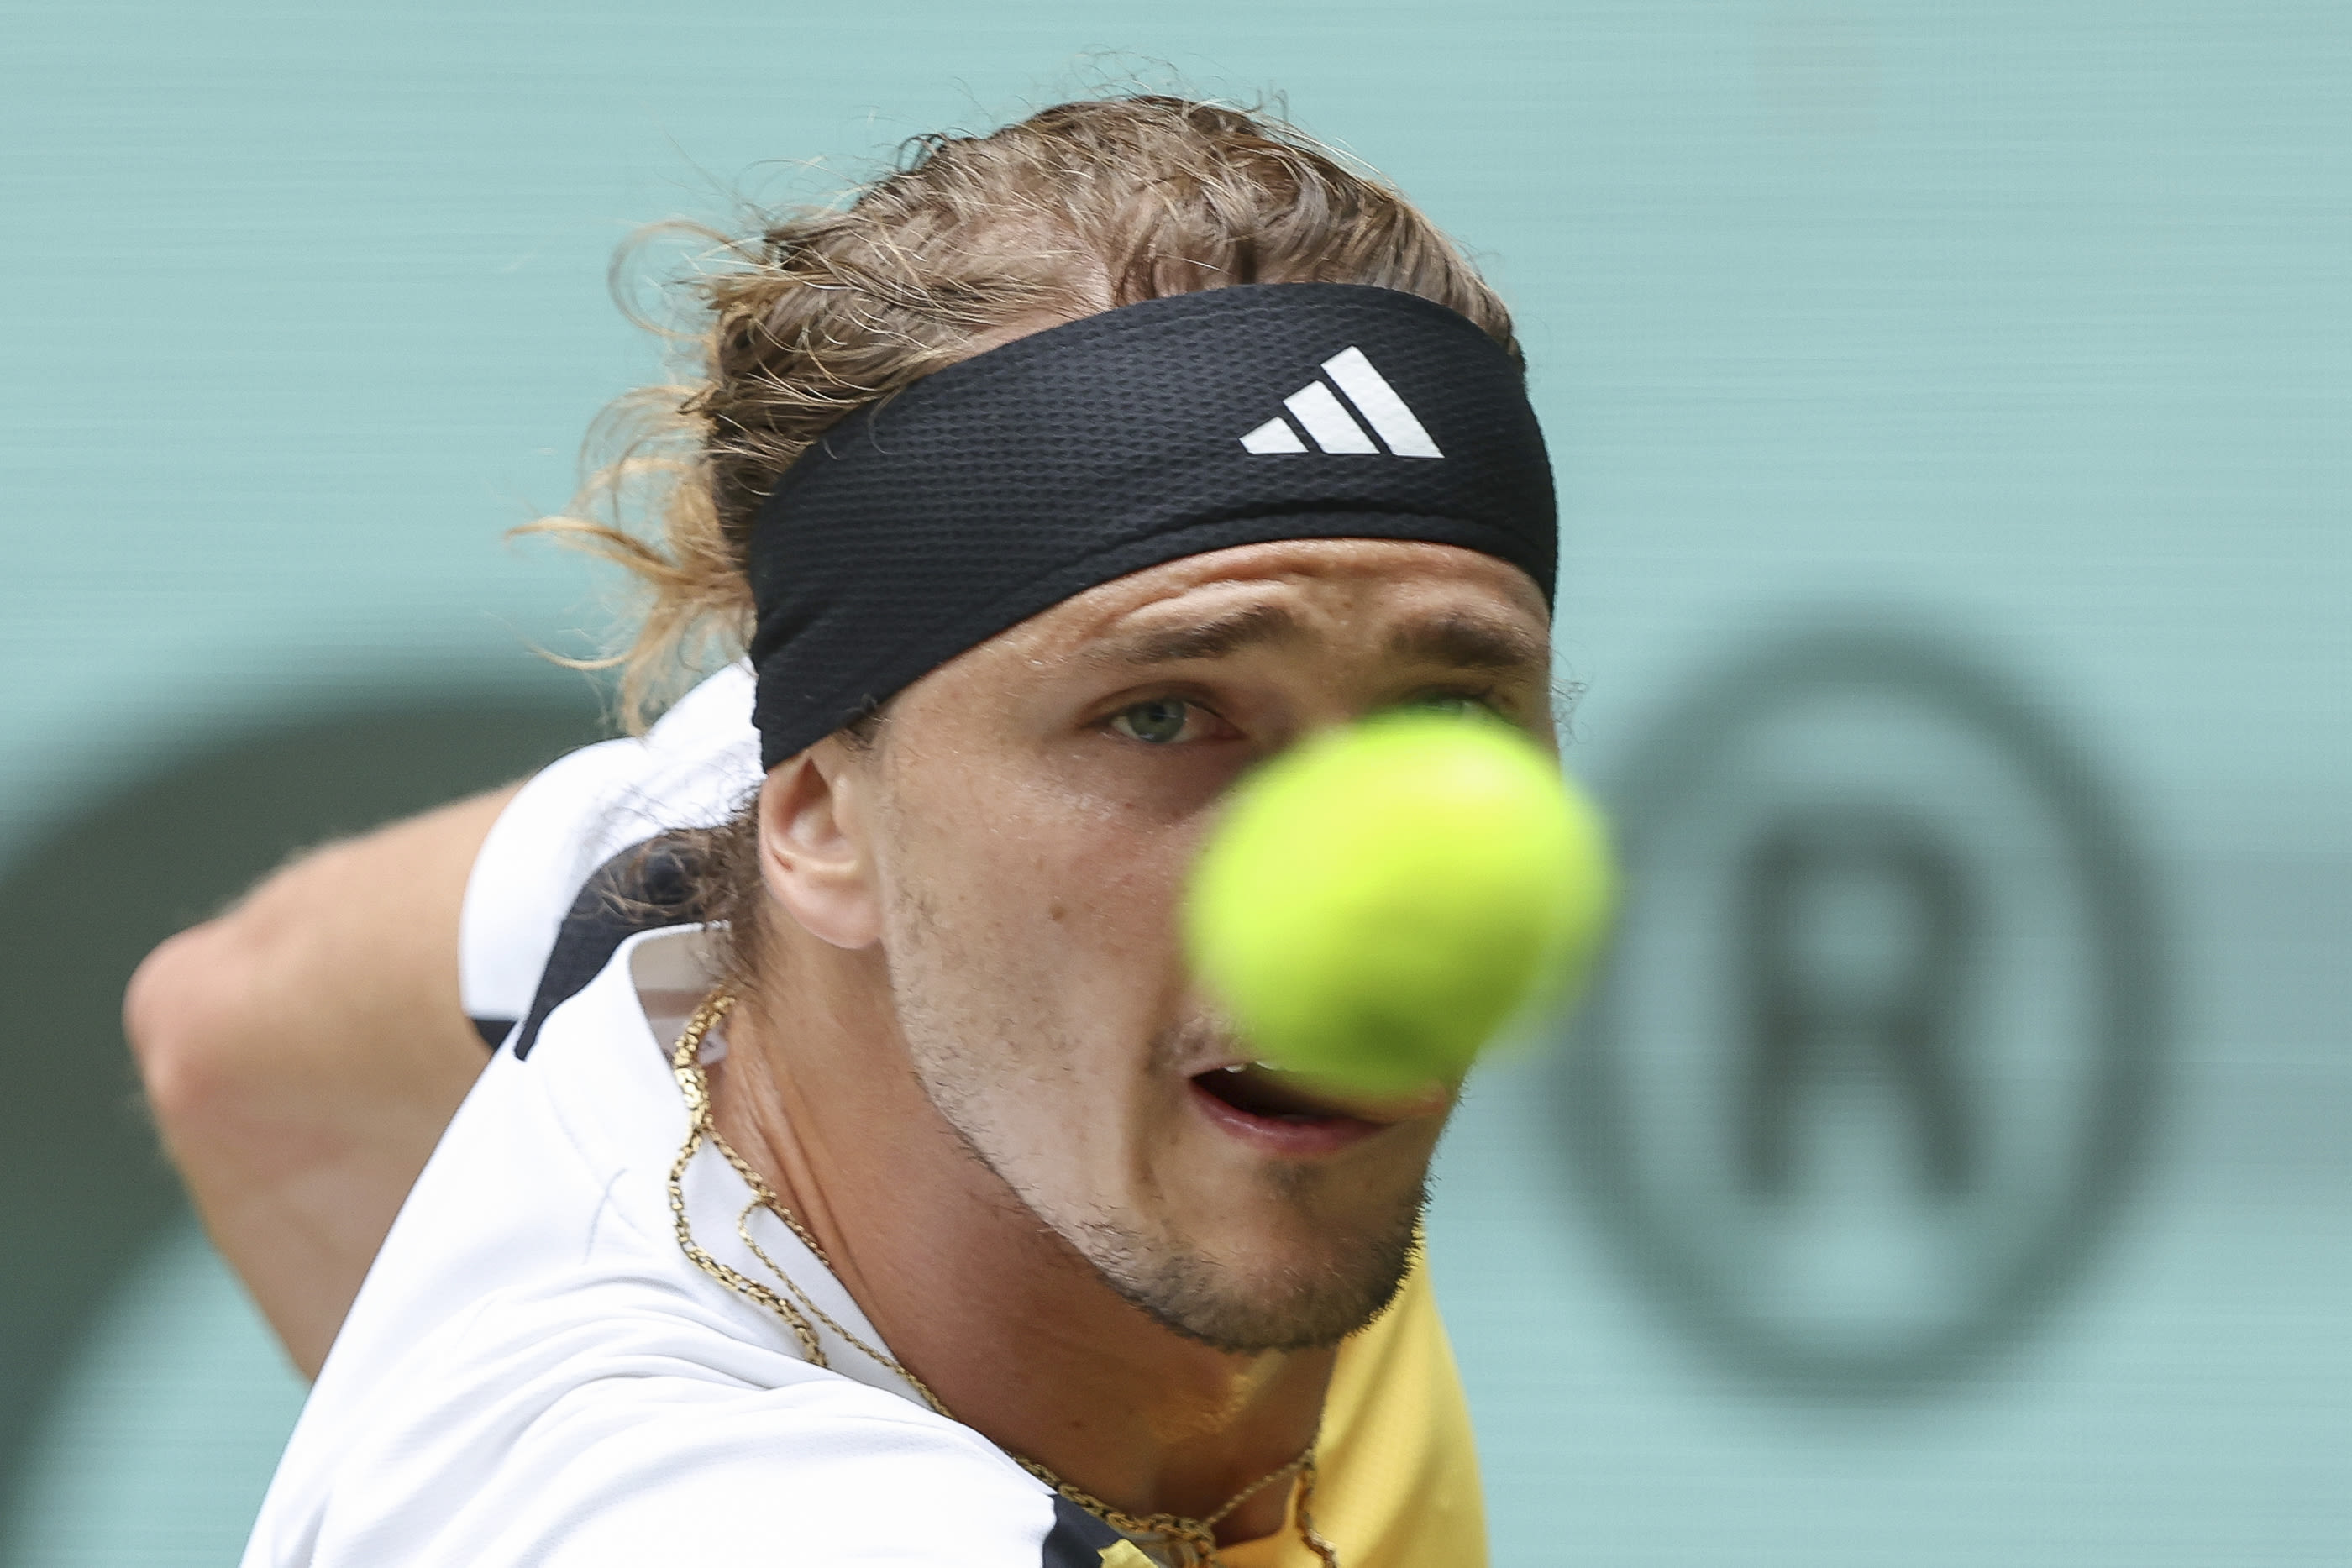 Zverev outlasts Fils and joined by Sinner in Halle semifinals